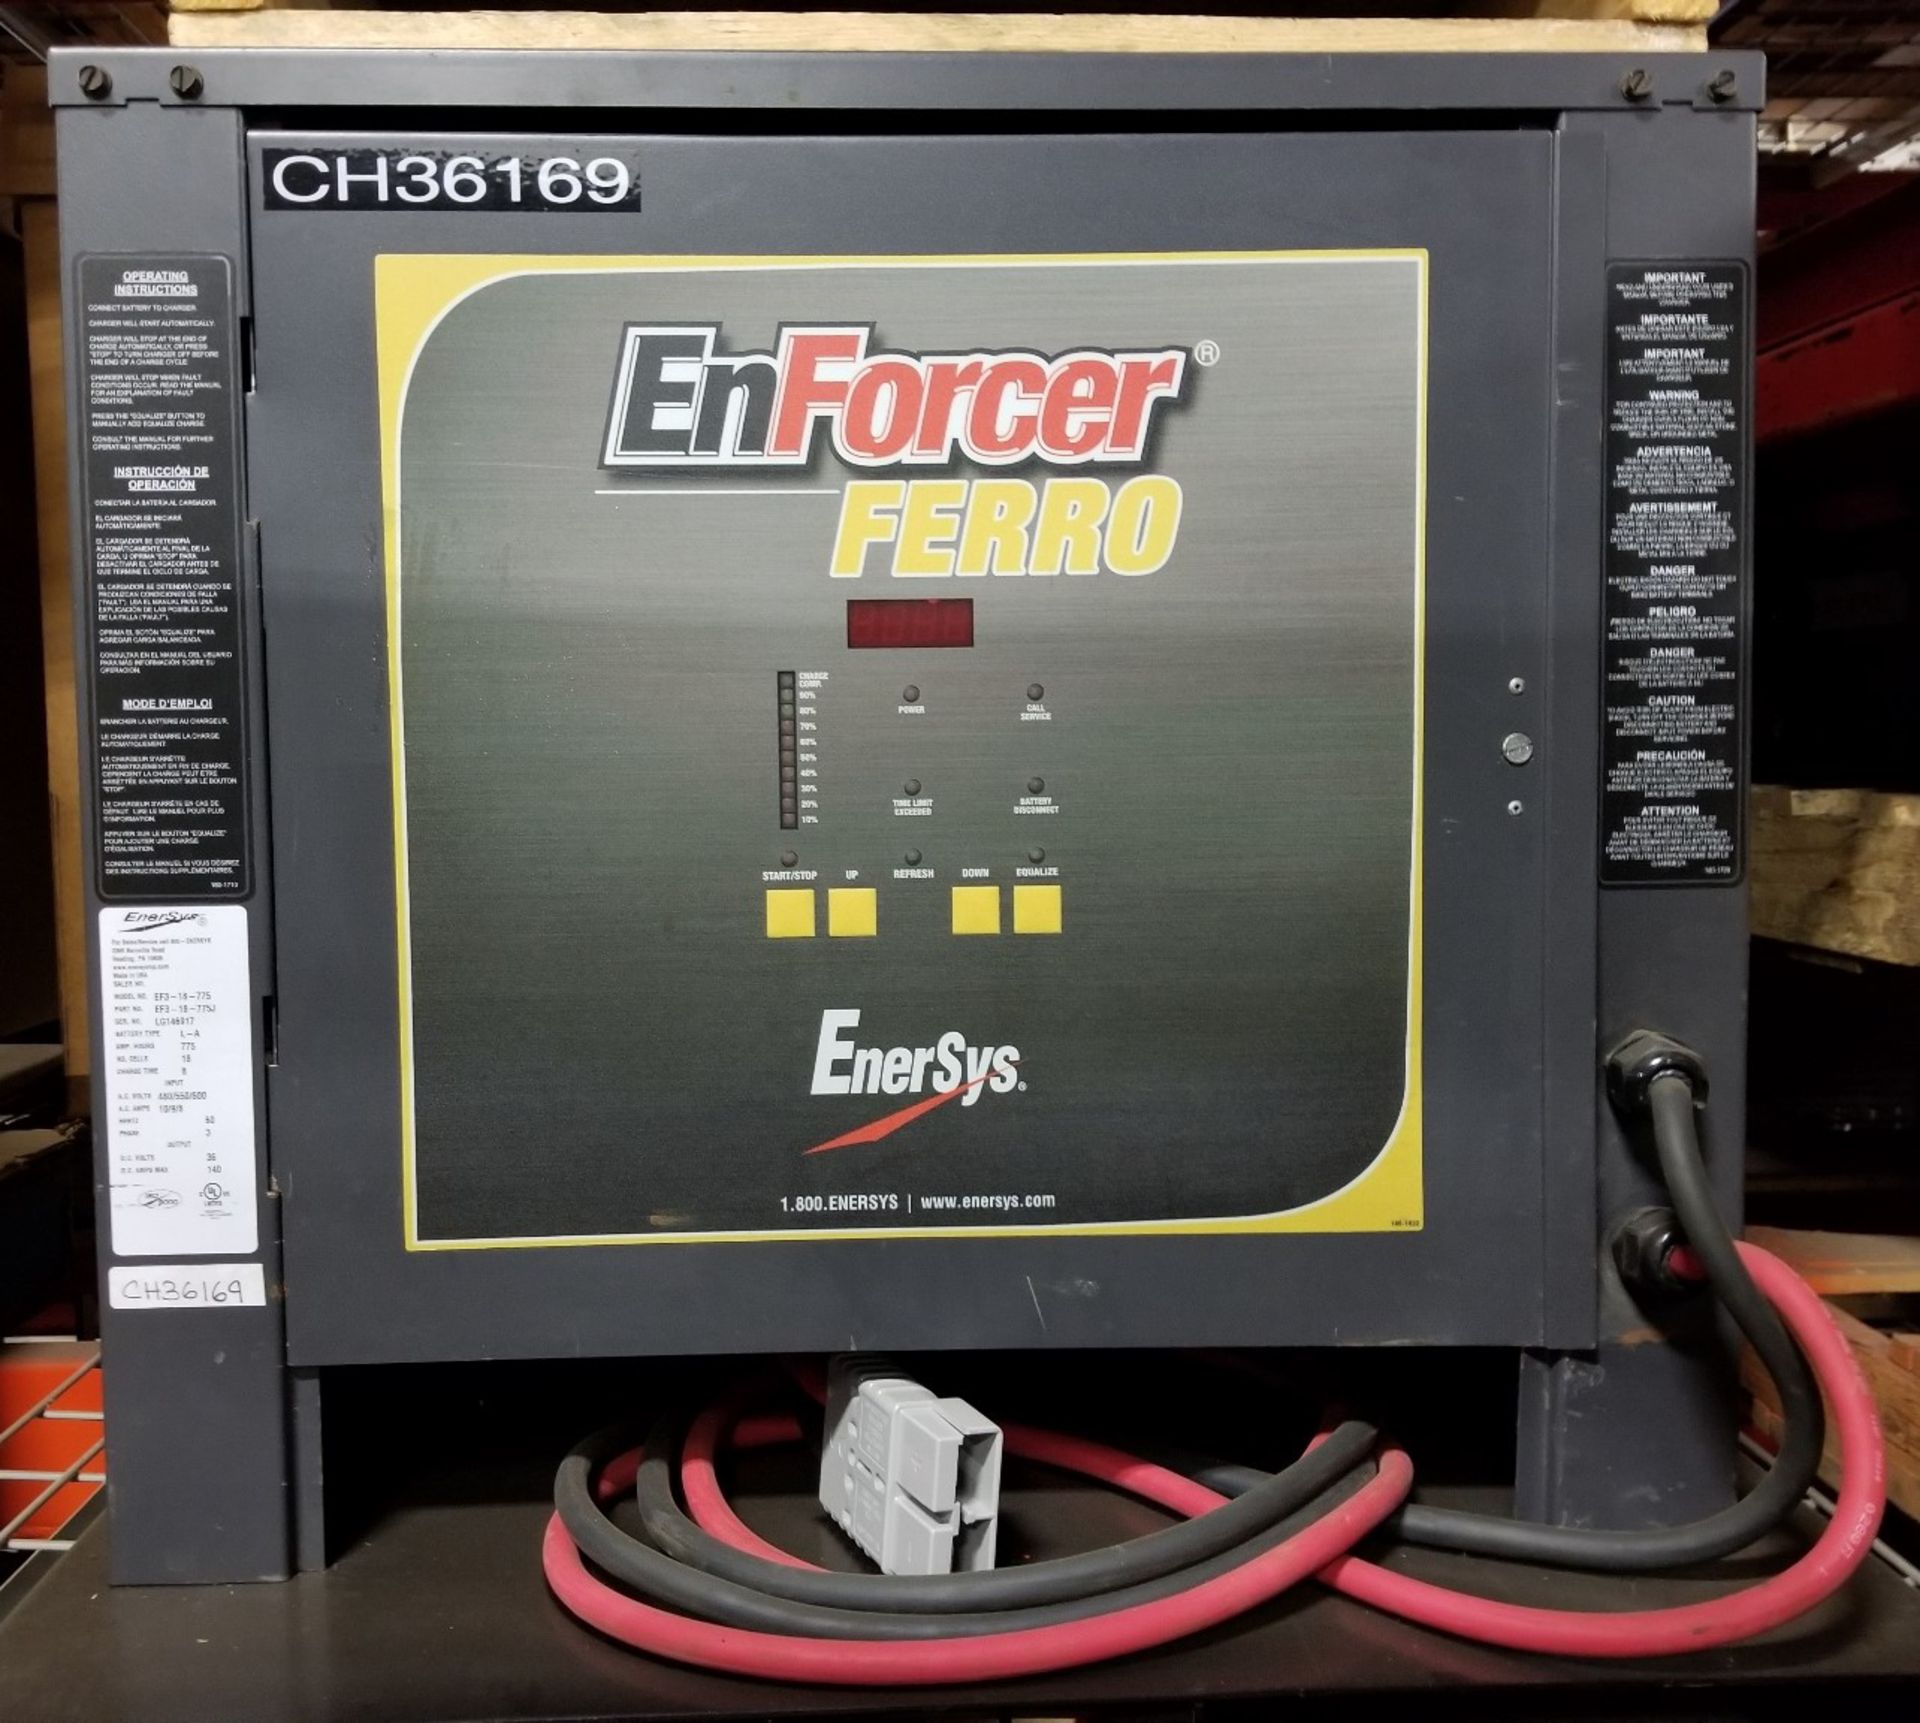 ENERSYS EF318775 36V BATTERY CHARGER WITH 140A, 775V, 350 GREY CONNECTOR, INPUT VOLTAGE 480/550/600,